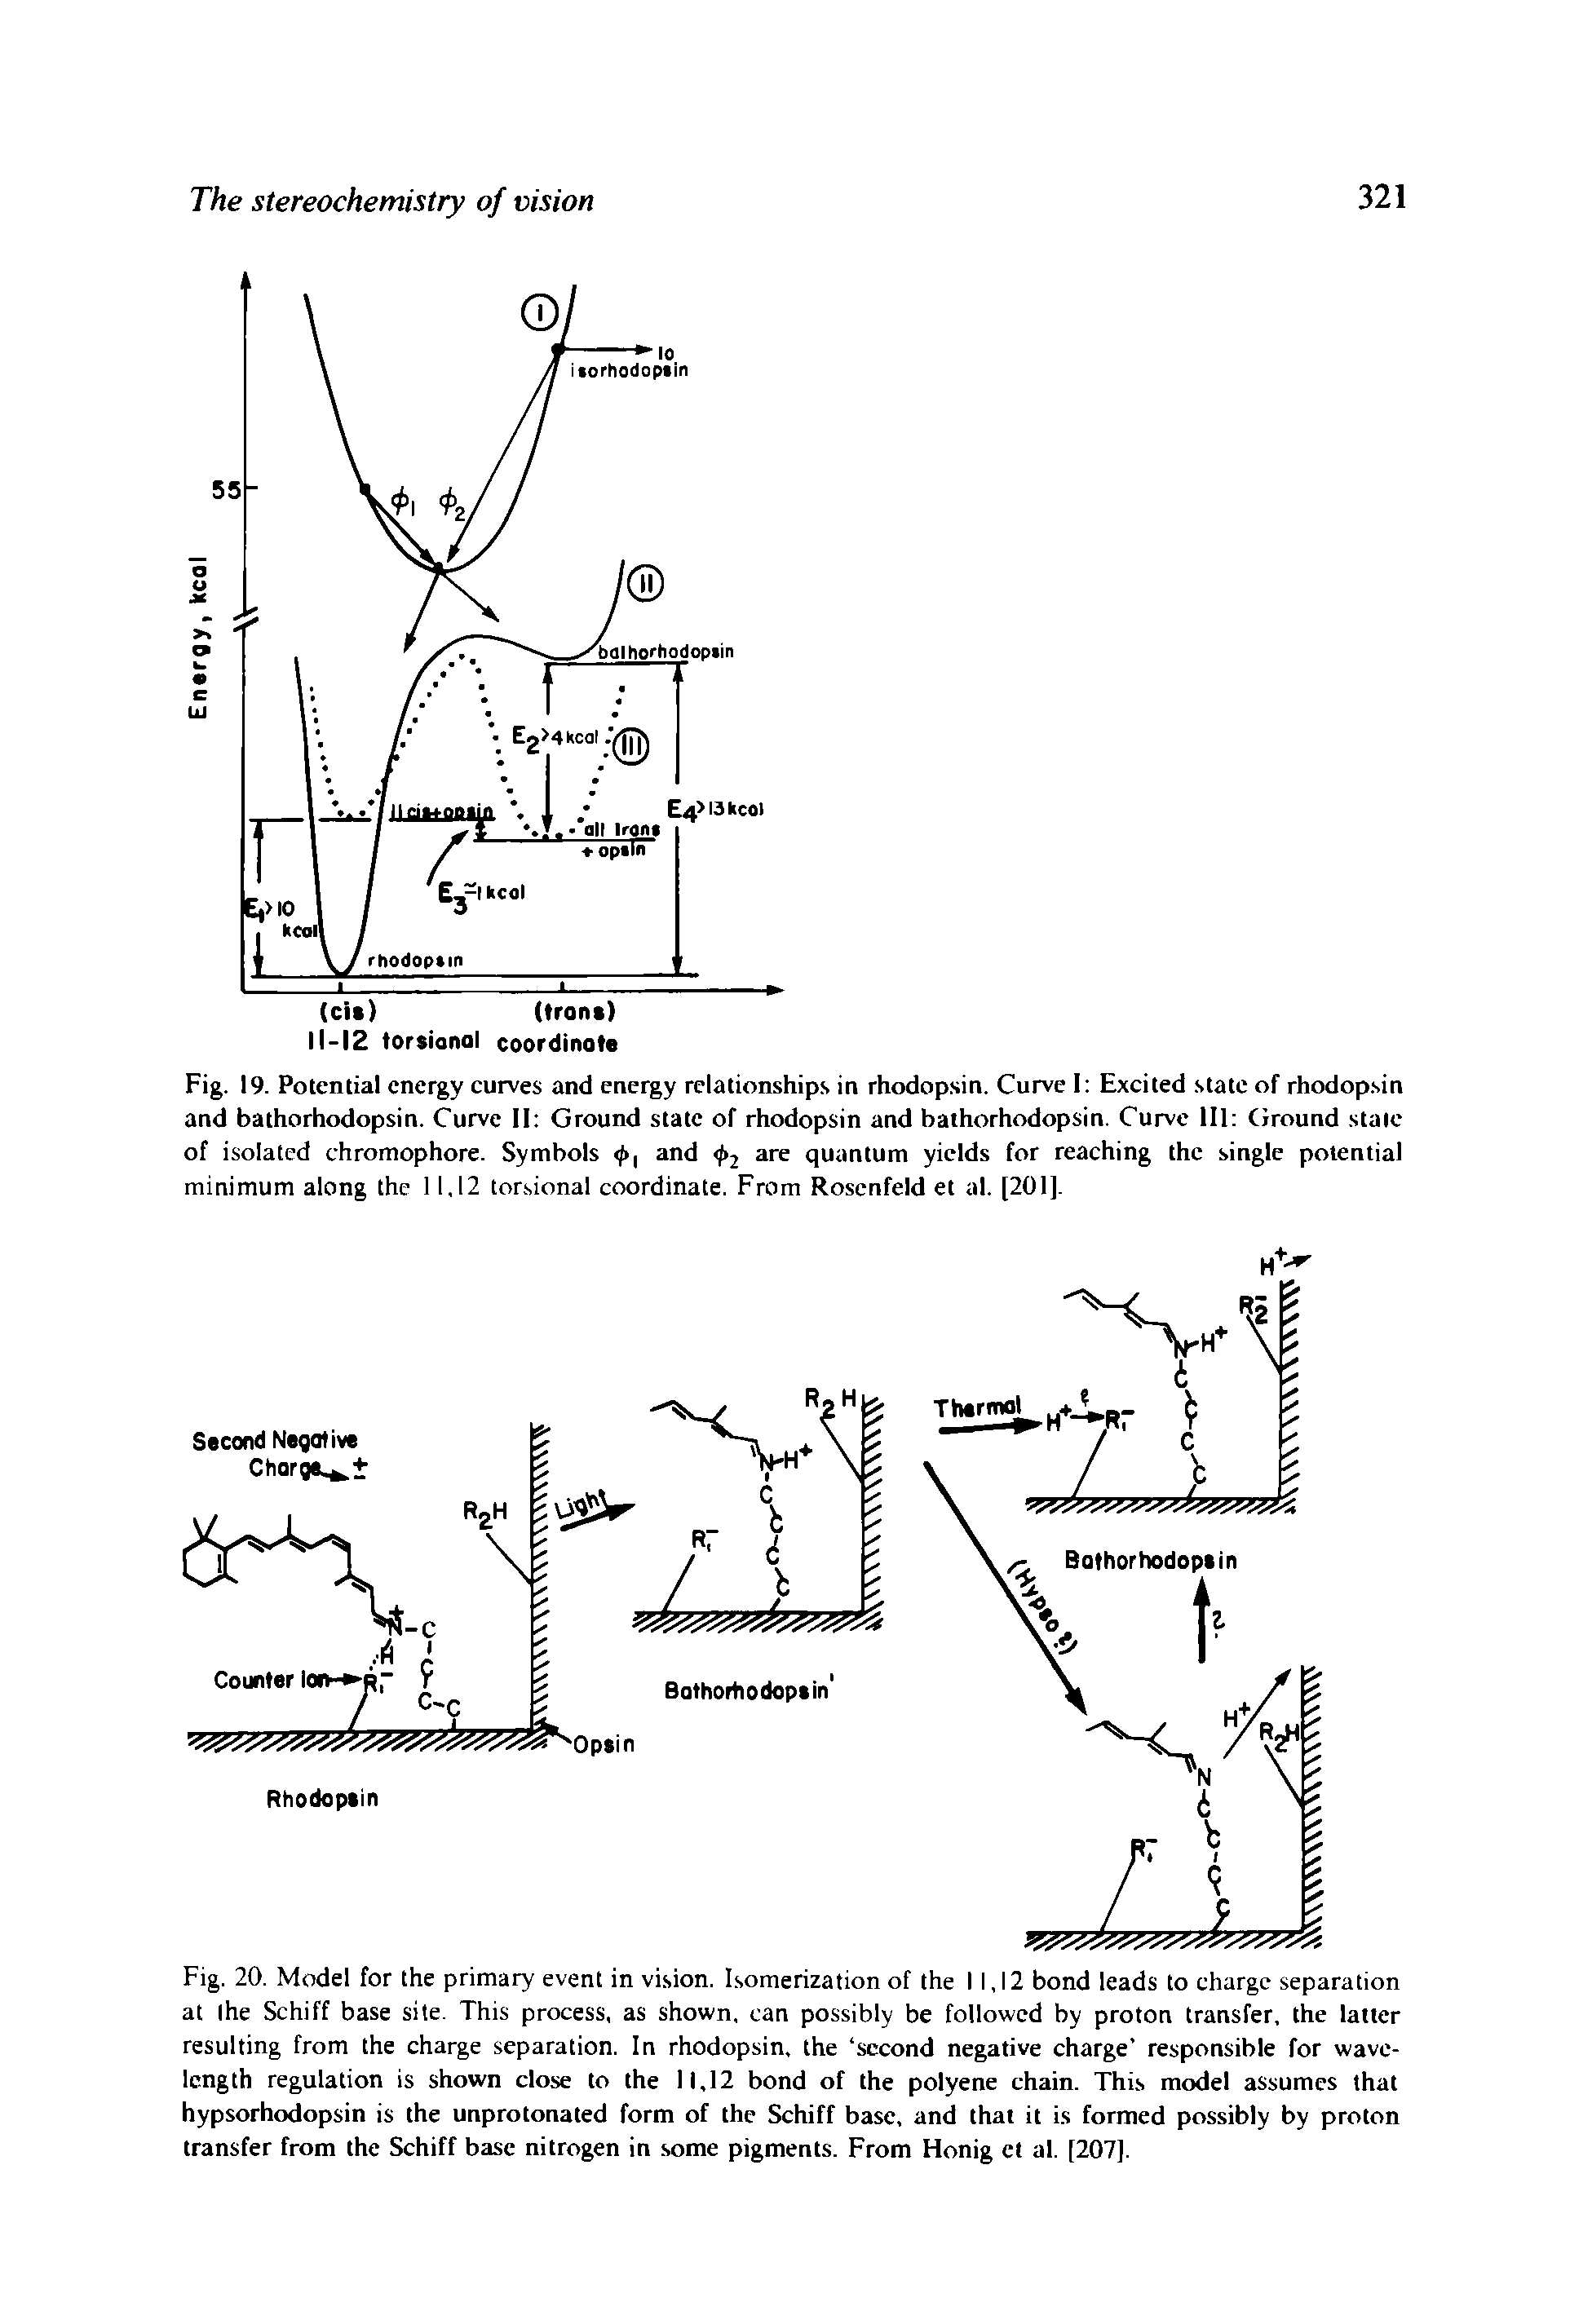 Fig. 19. Potential energy curves and energy relationships in rhodopsin. Curve I Excited state of rhodopsin and bathorhodopsin. Curve II Ground state of rhodopsin and bathorhodopsin. Curve 111 Ground stale of isolated chromophore. Symbols </>, and </>2 are quantum yields for reaching the single potential minimum along the 11,12 torsional coordinate. From Rosenfeld et al. [201].